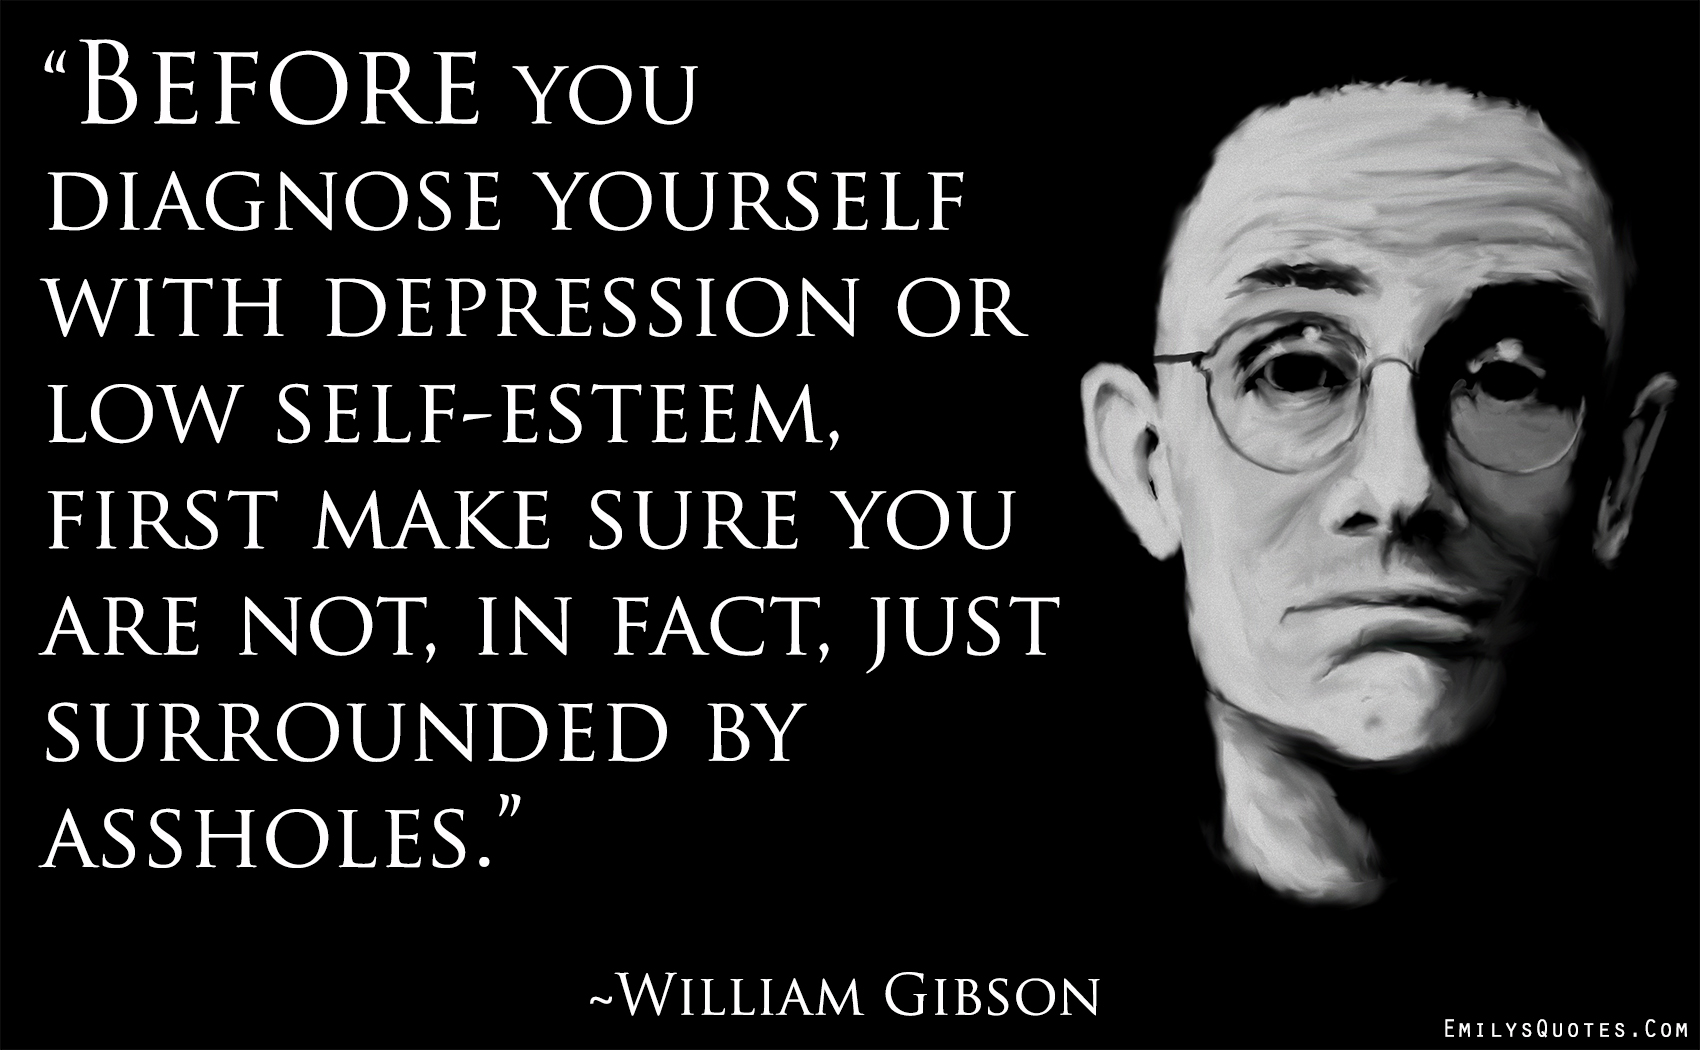 Before you diagnose yourself with depression or low self-esteem, first make sure you are not, in fact, just surrounded by assholes